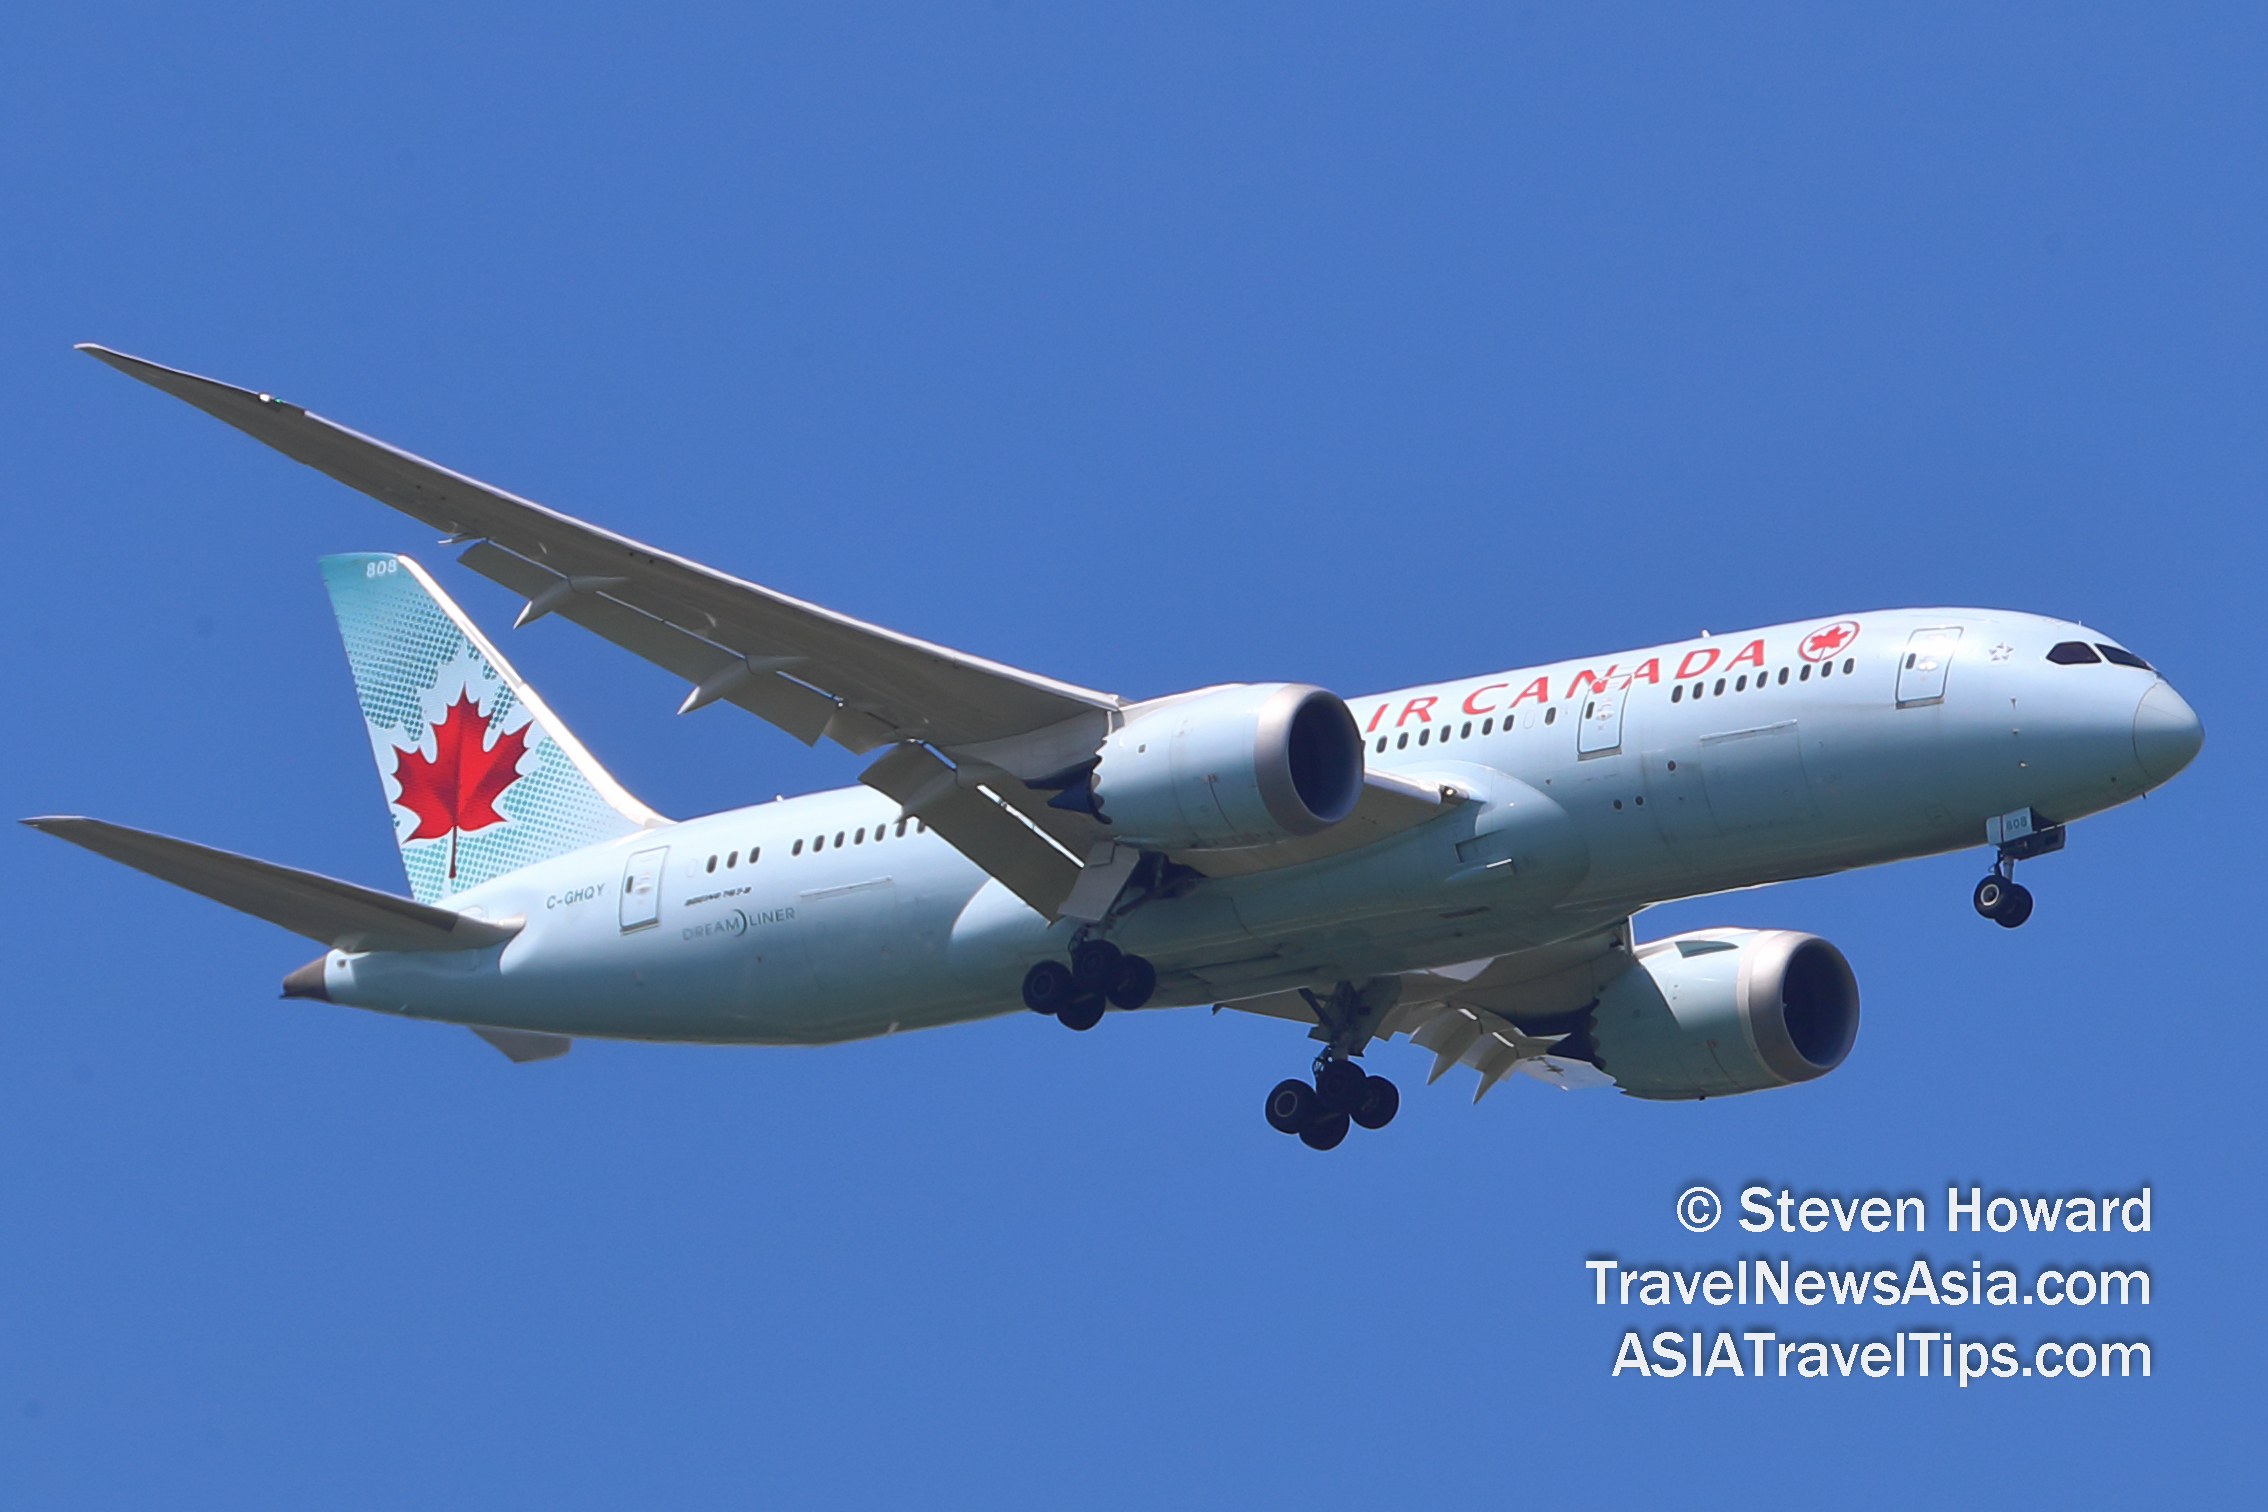 Air Canada Boeing 787-8 Dreamliner reg: C-GHQY. Picture by Steven Howard of TravelNewsAsia.com Click to enlarge.